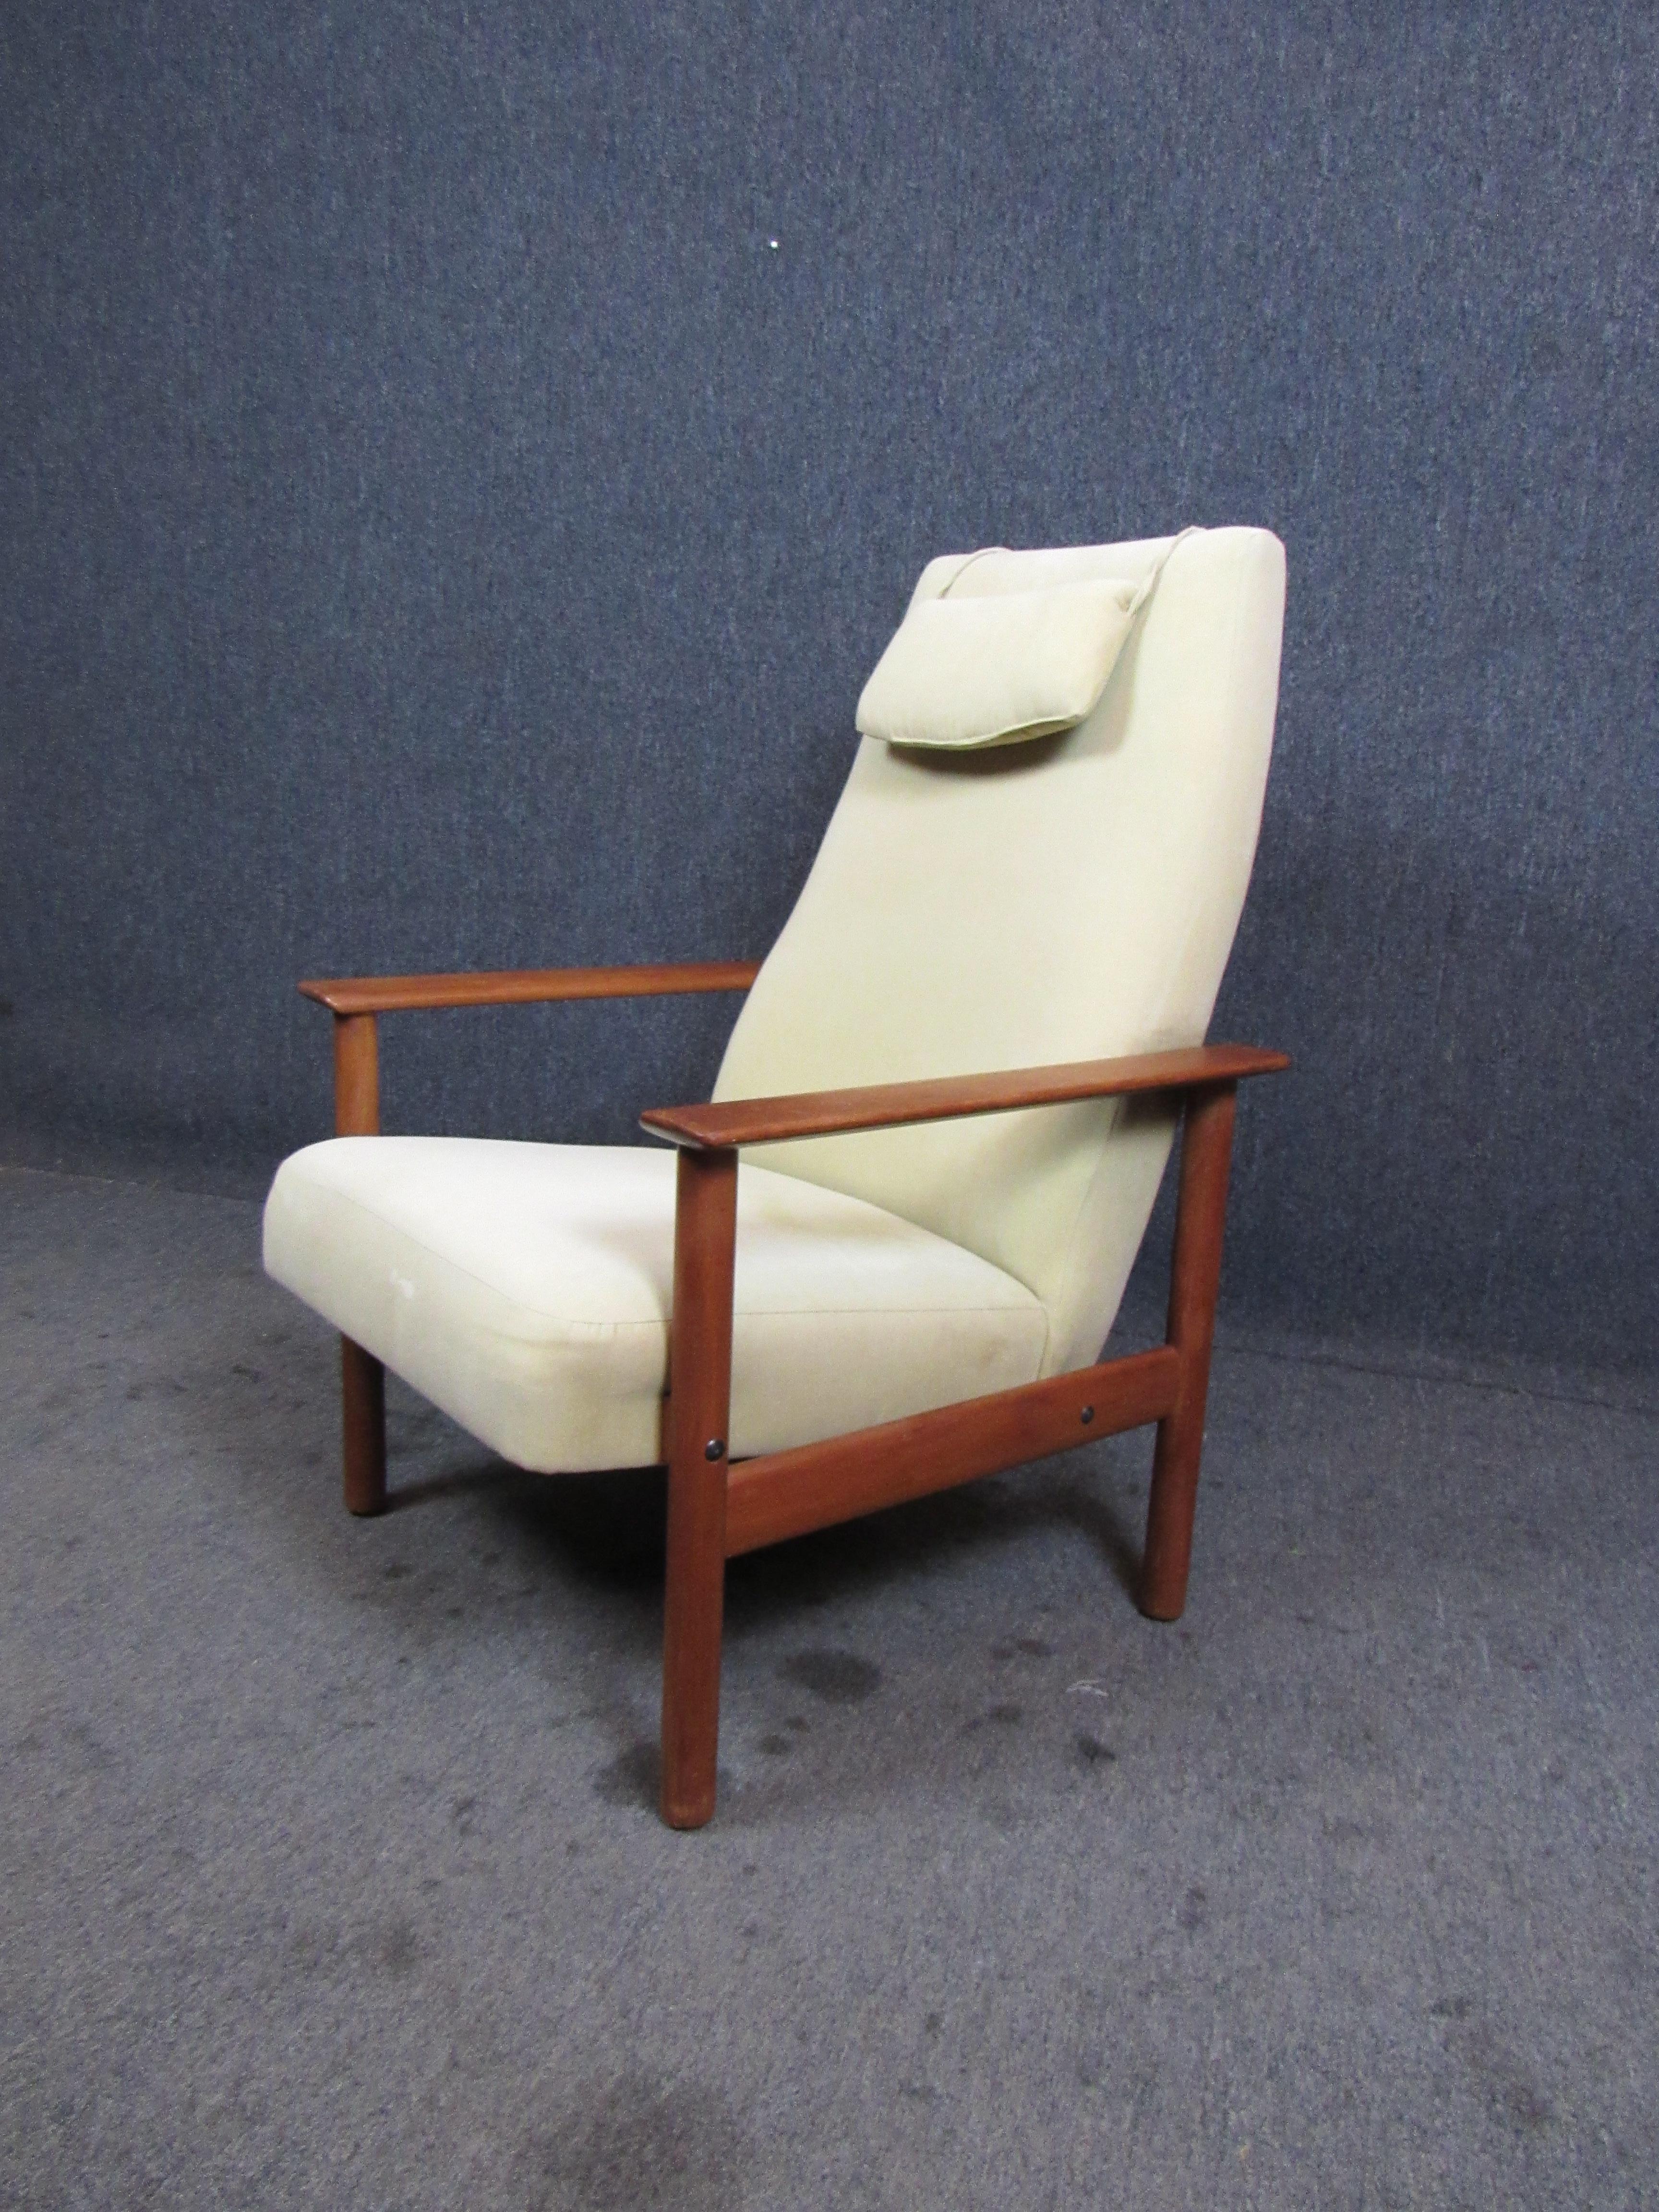 Terrific Mid-Century Modern vintage Danish lounge chair. A sturdy teak frame supports ample plush cushions for a wonderful sitting experience. The included pillow provides additional comfort for the neck and head. Please confirm item pickup location